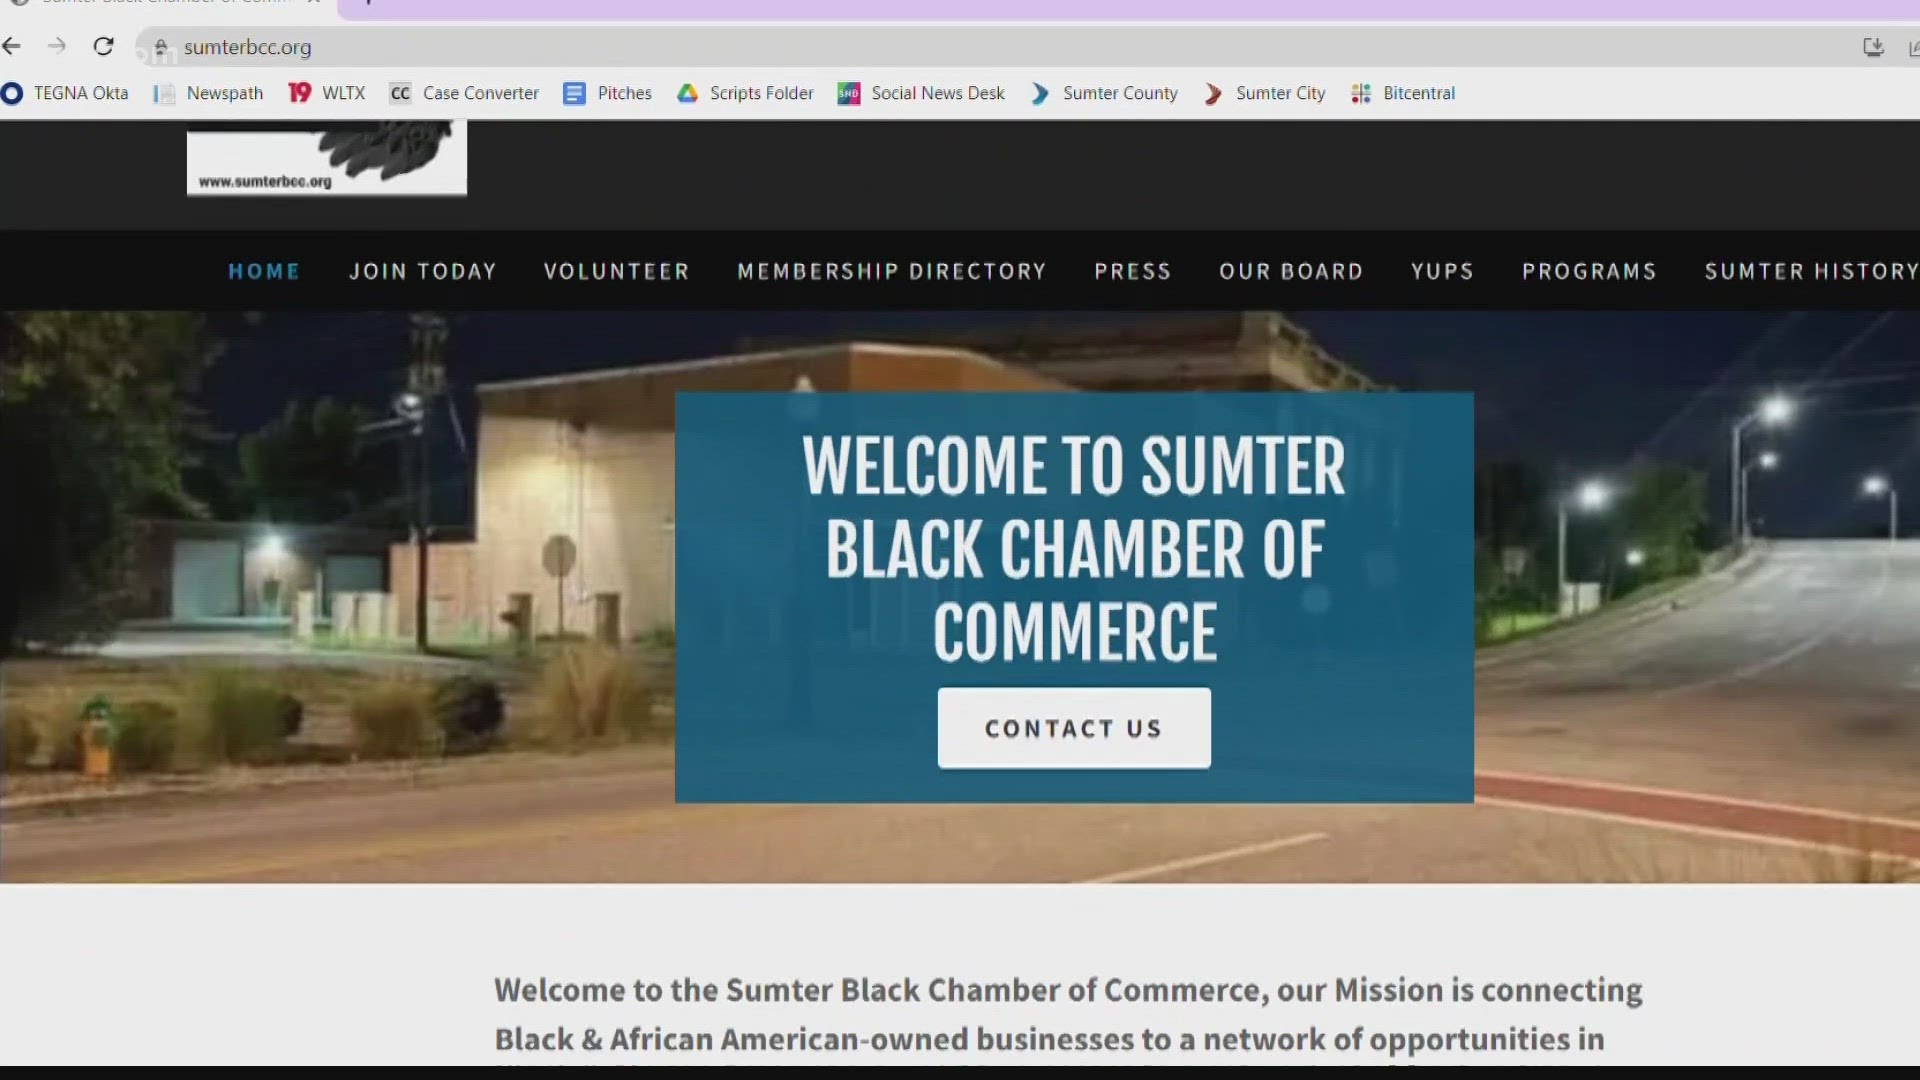 The Sumter Black Chamber of Commerce is collecting data on Black owned businesses in Sumter, Lee and Clarendon counties.